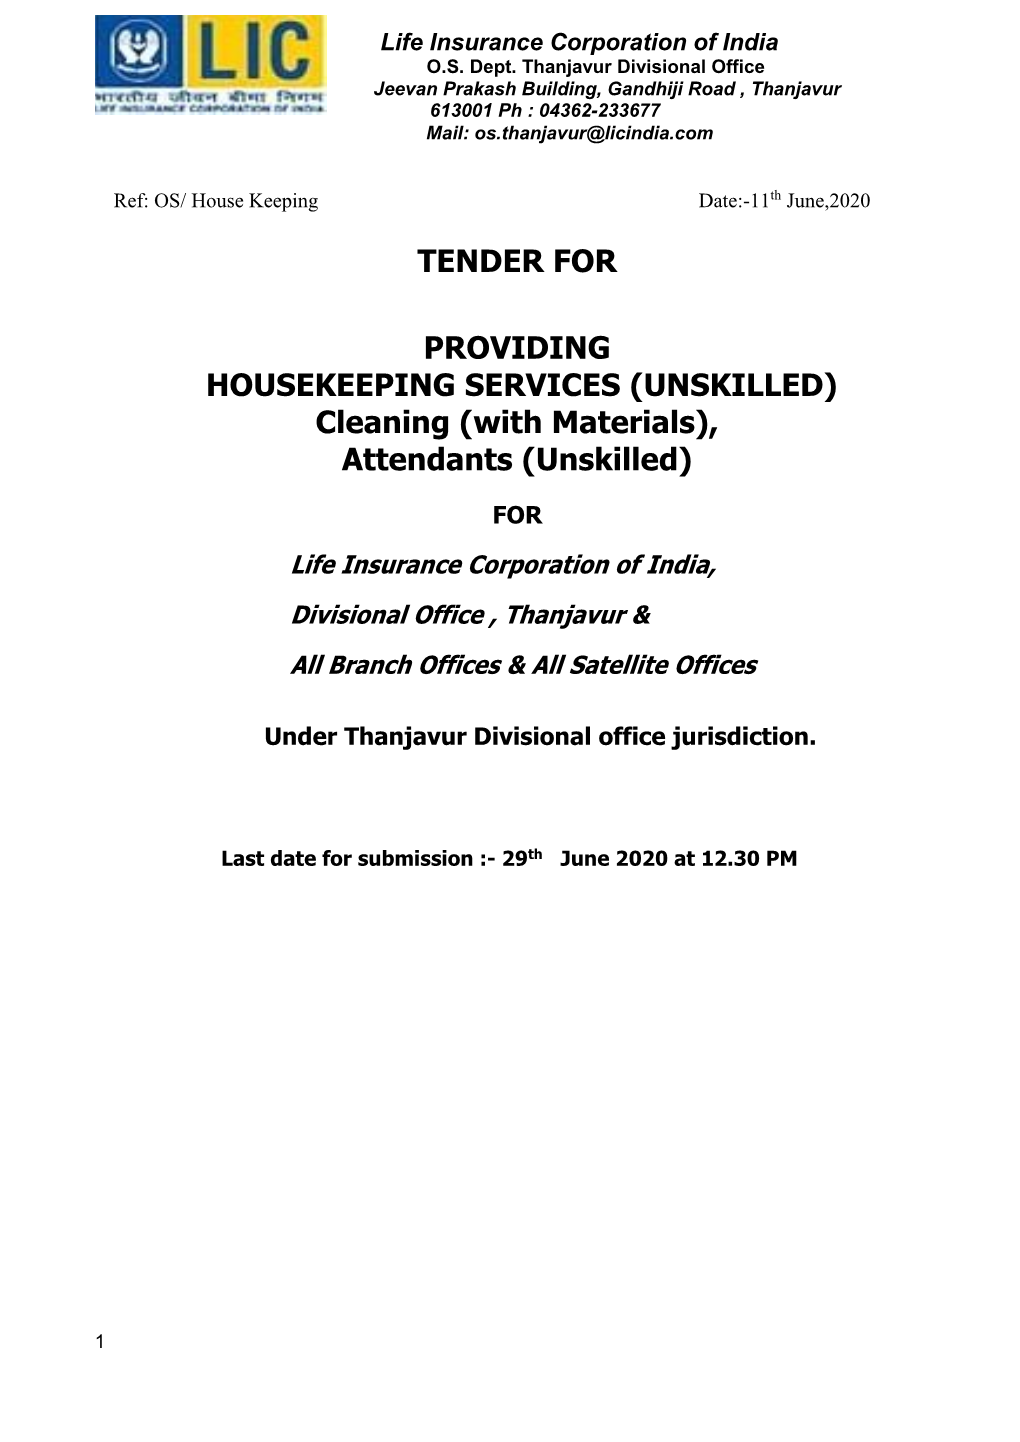 Tender for Providing Housekeeping Services